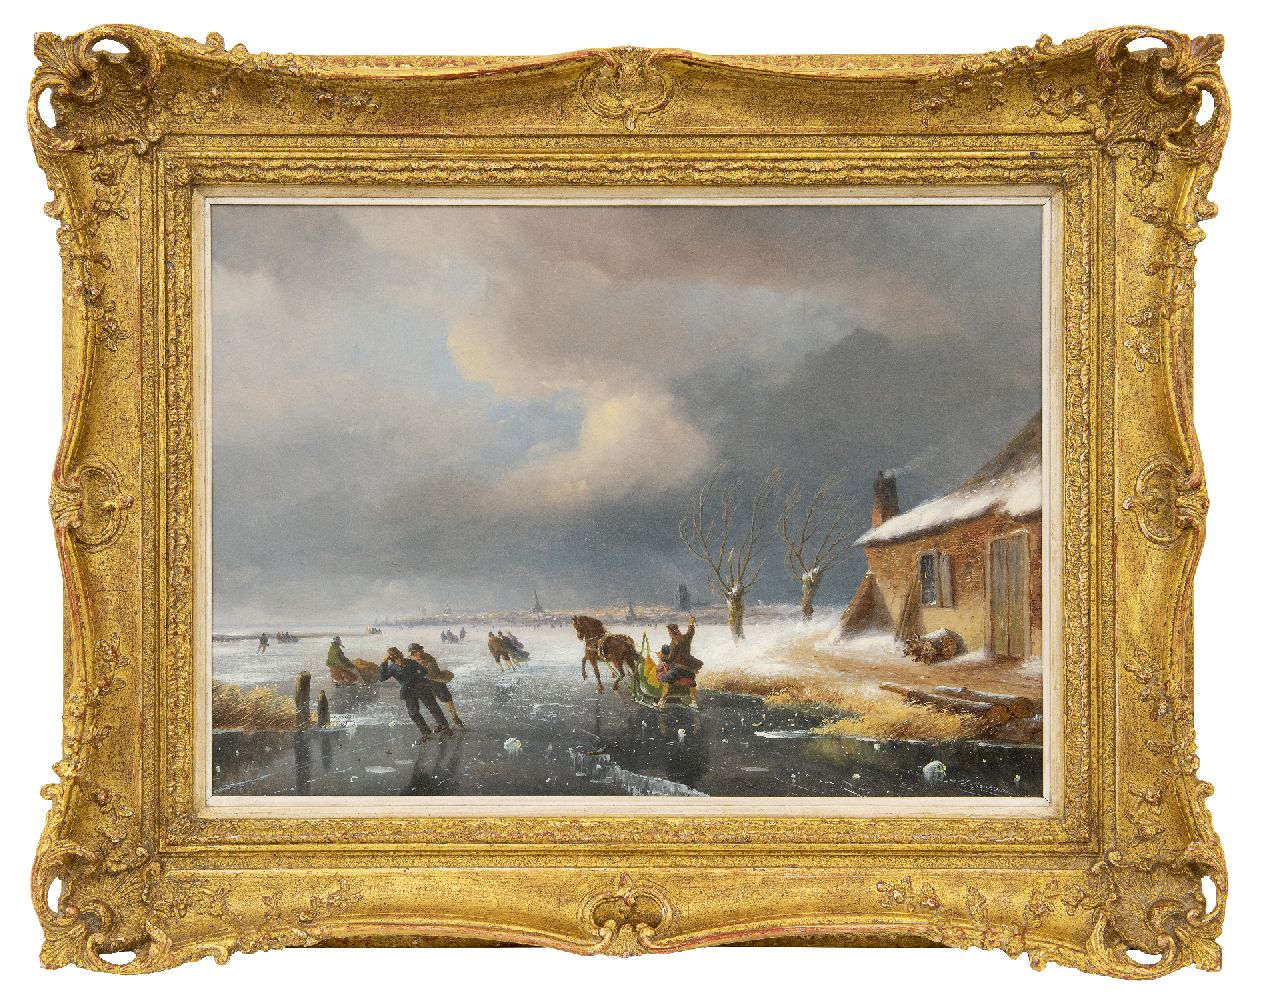 Roosenboom N.J.  | Nicolaas Johannes Roosenboom | Paintings offered for sale | Skaters on a frozen river at the outskirts of a town, oil on panel 36.1 x 50.0 cm, signed l.r.